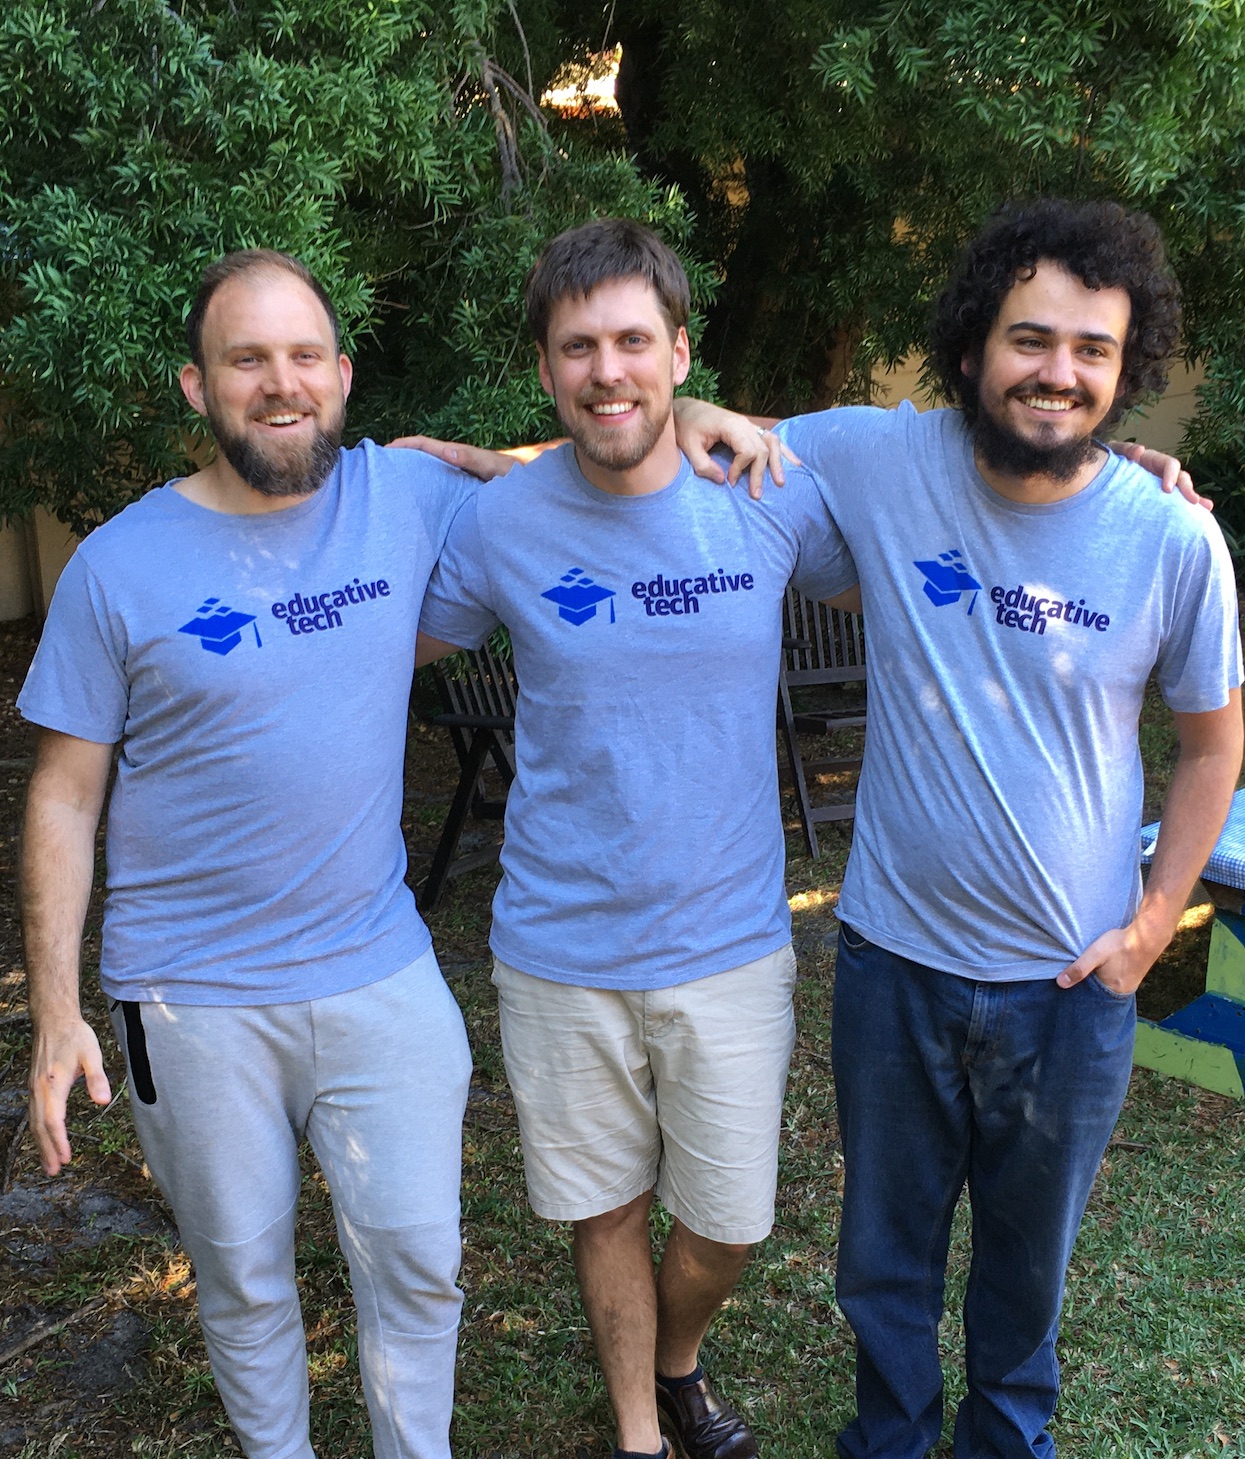 Image of the Educative tech team together smiling outdoors wearing branded t-shirts